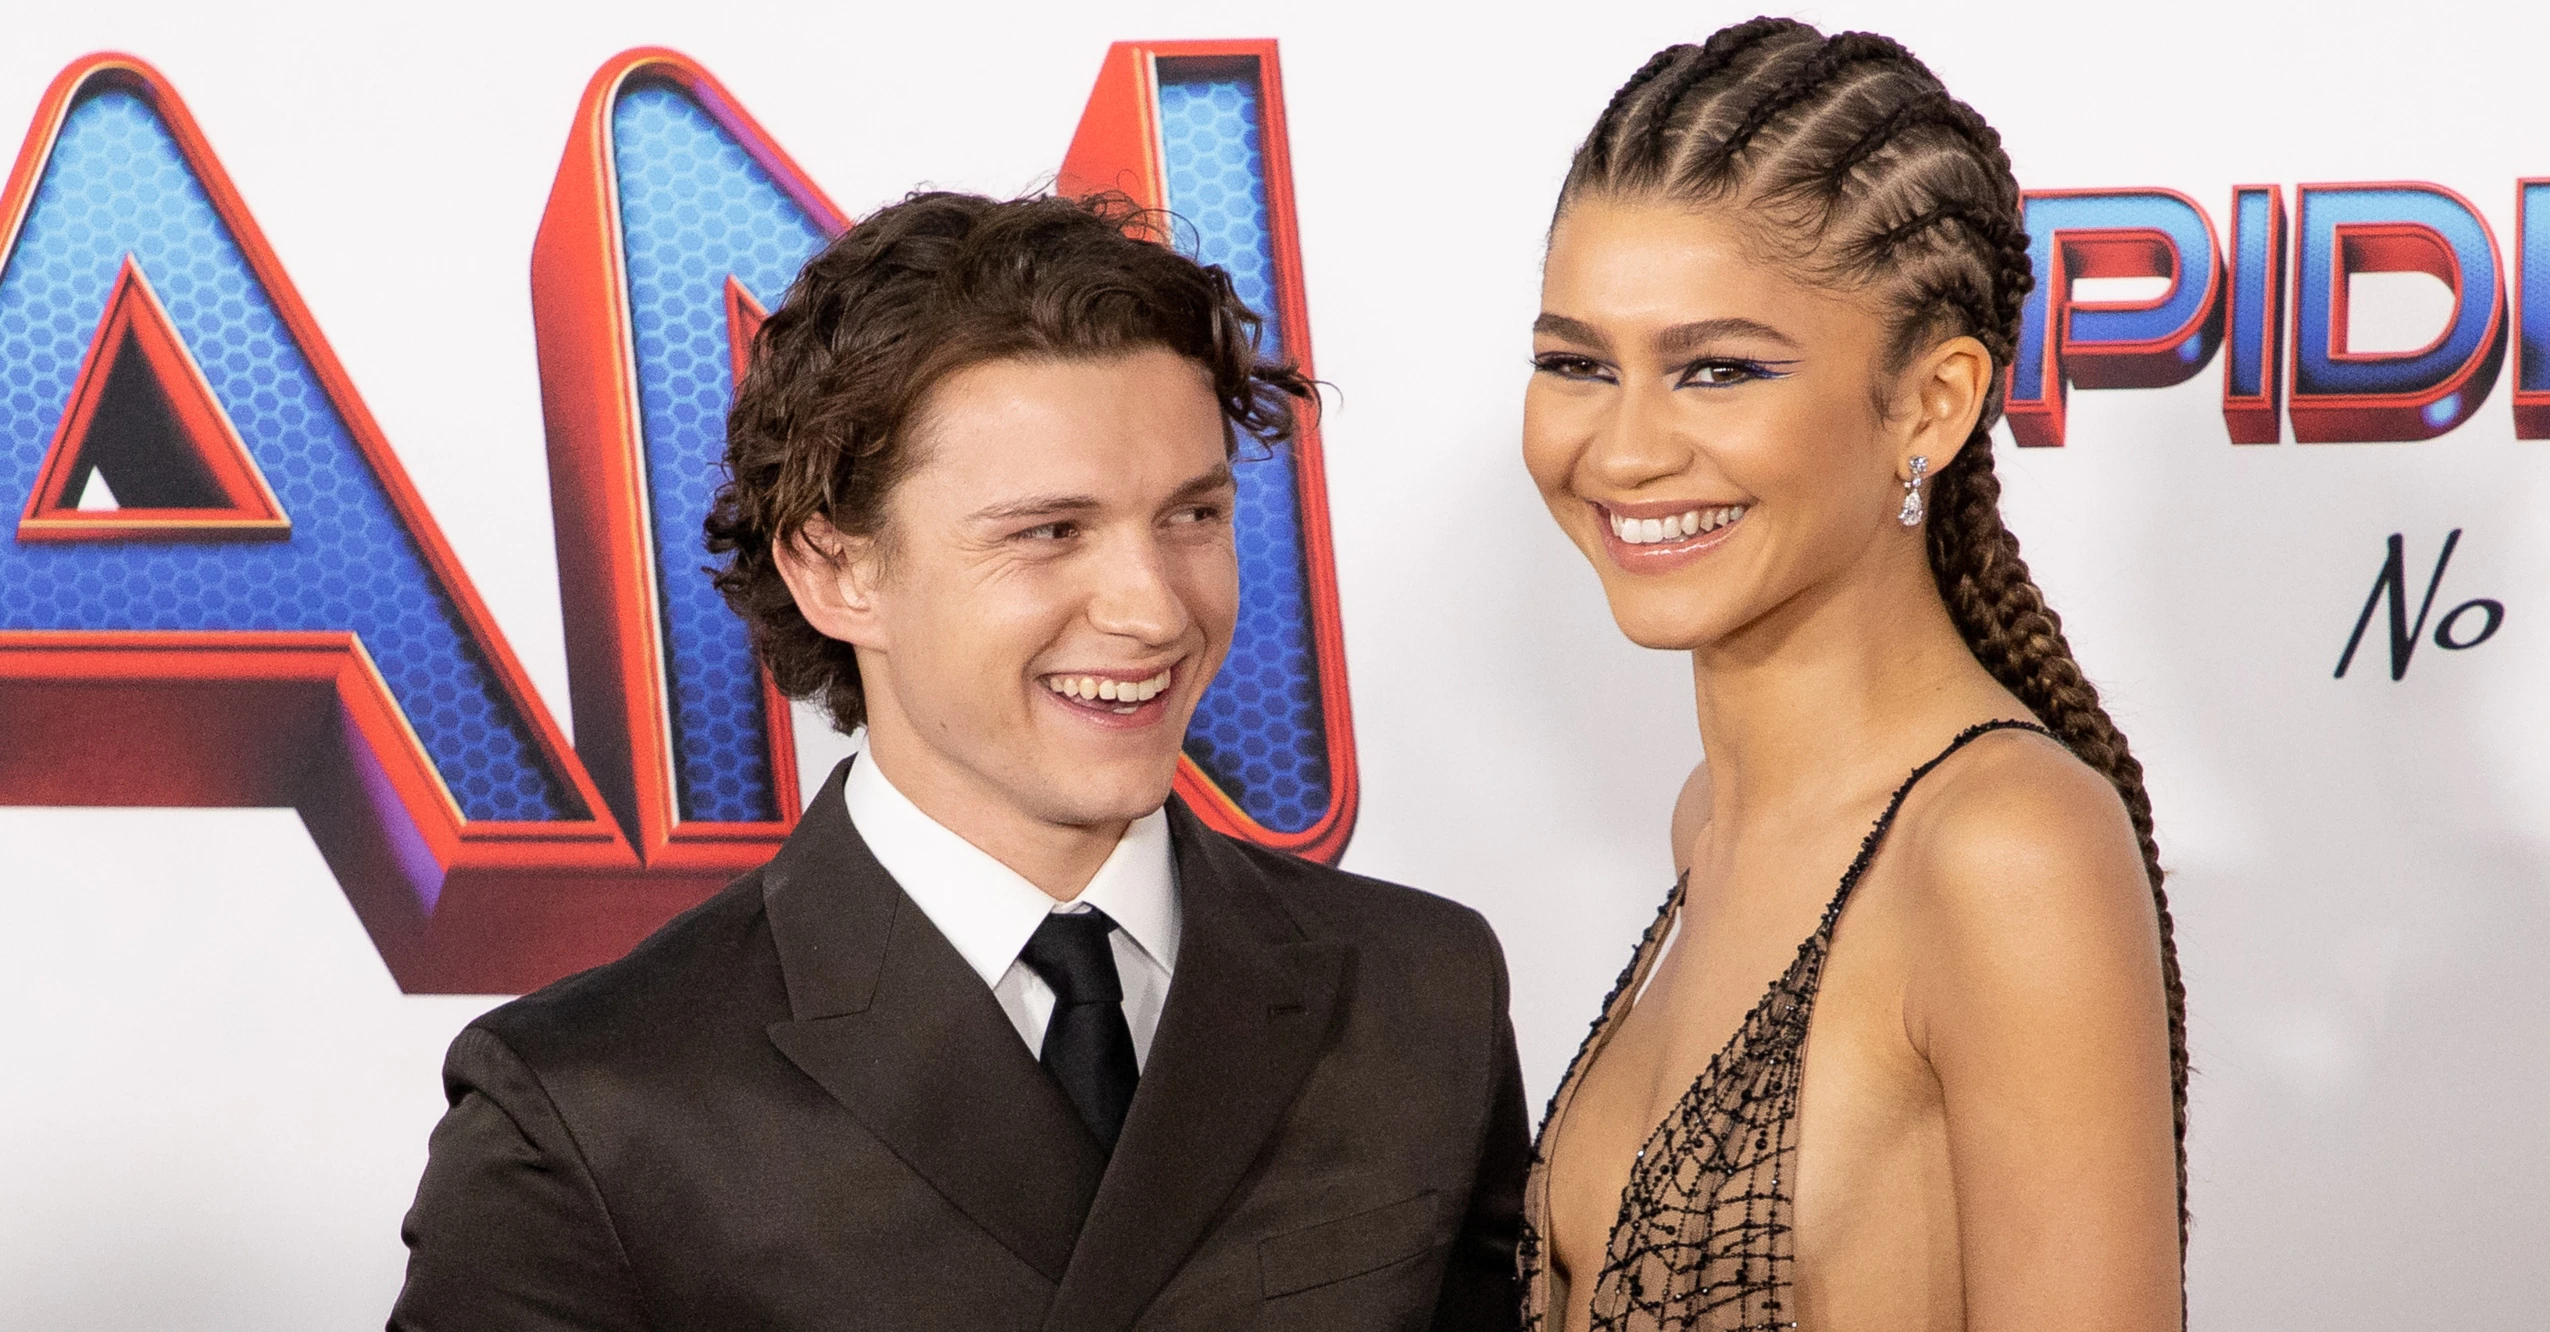 Tom Holland Says ‘It’s Great’ That Girlfriend and ‘Spider-Man’ Co-Star Zendaya Is Taller Than Him